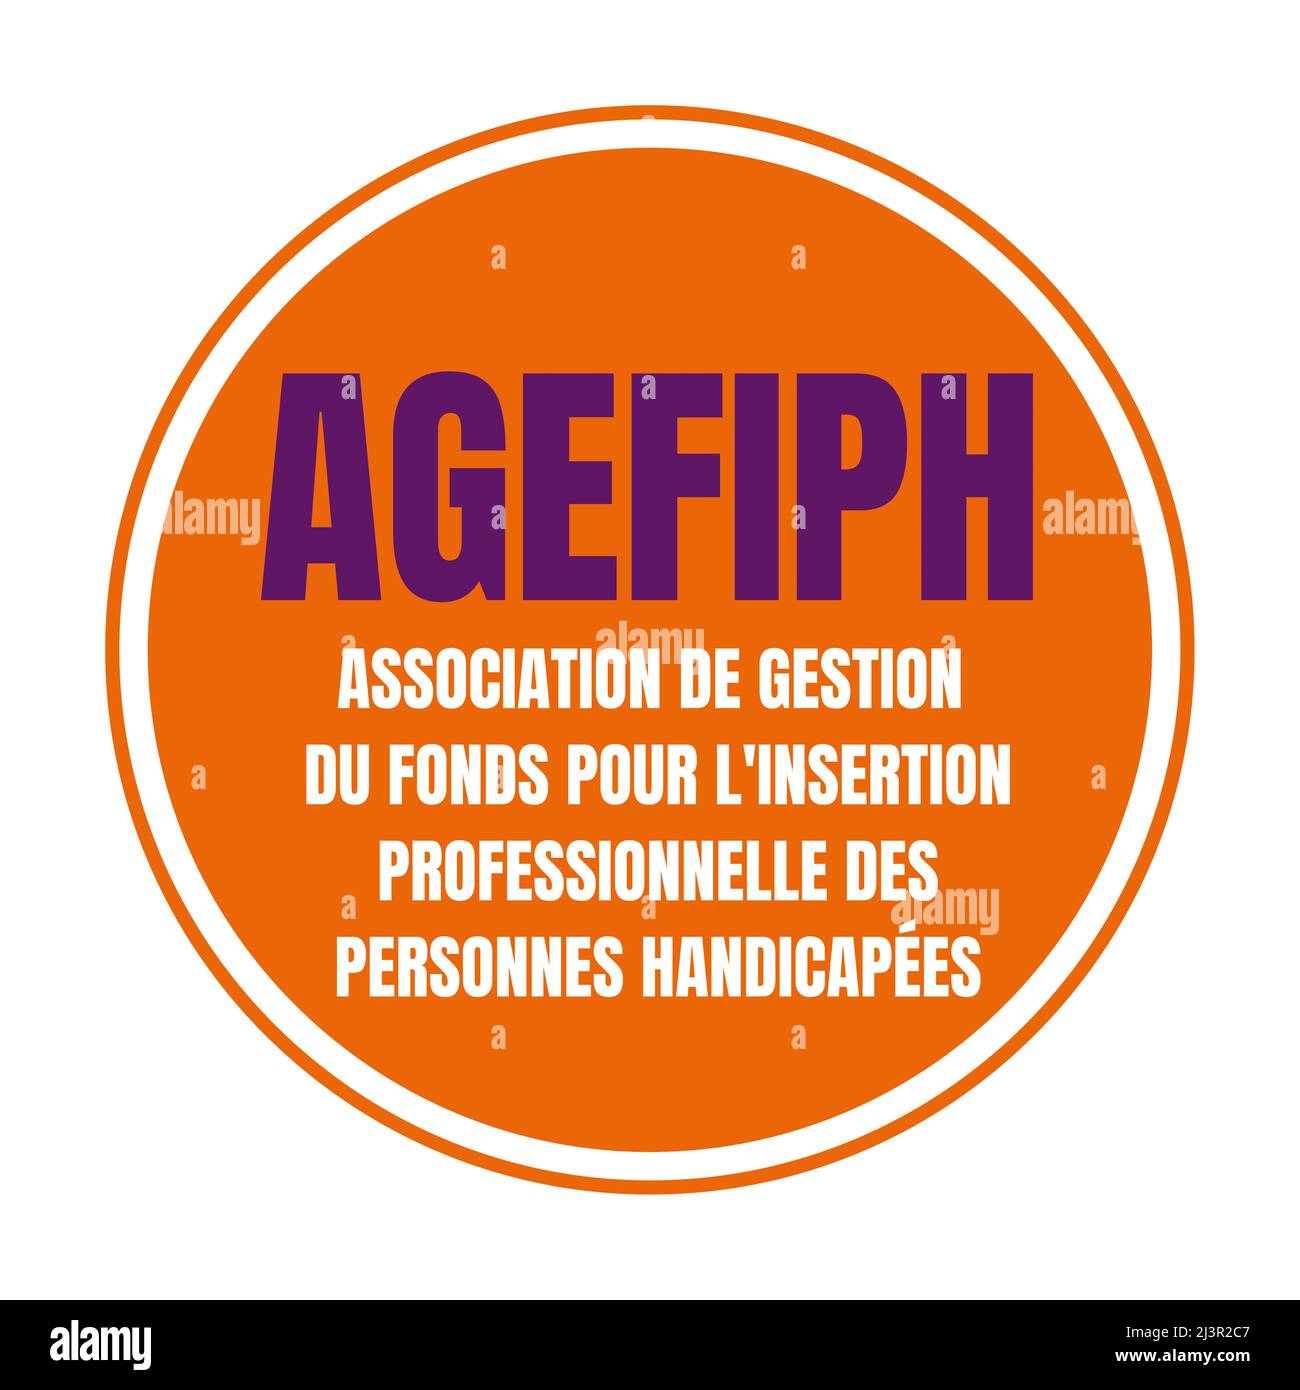 AGEFIPH association for the management of the fund for the professional integration of people with disabilities symbol in French language Stock Photo